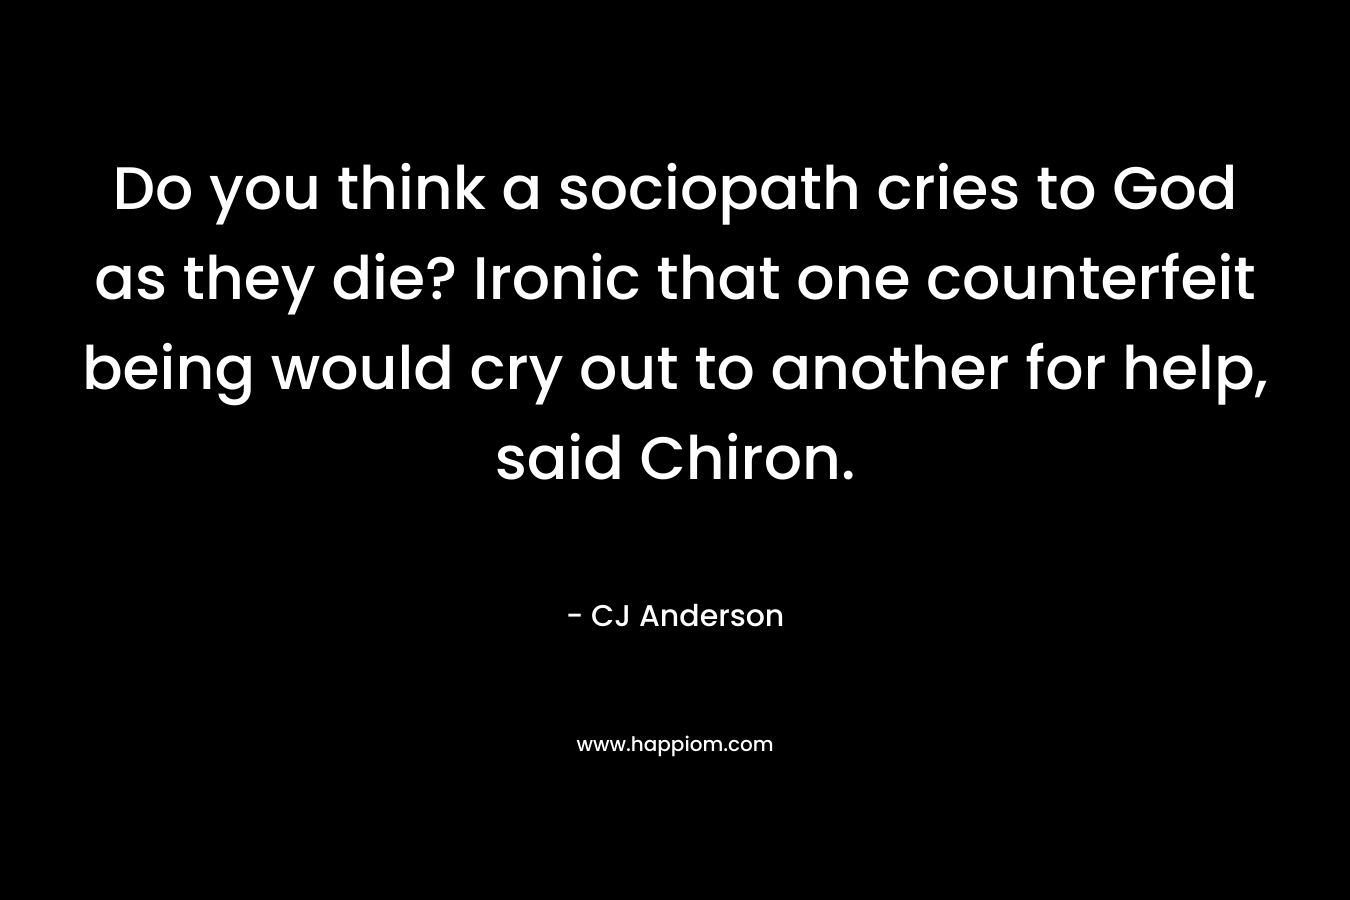 Do you think a sociopath cries to God as they die? Ironic that one counterfeit being would cry out to another for help, said Chiron. – CJ Anderson